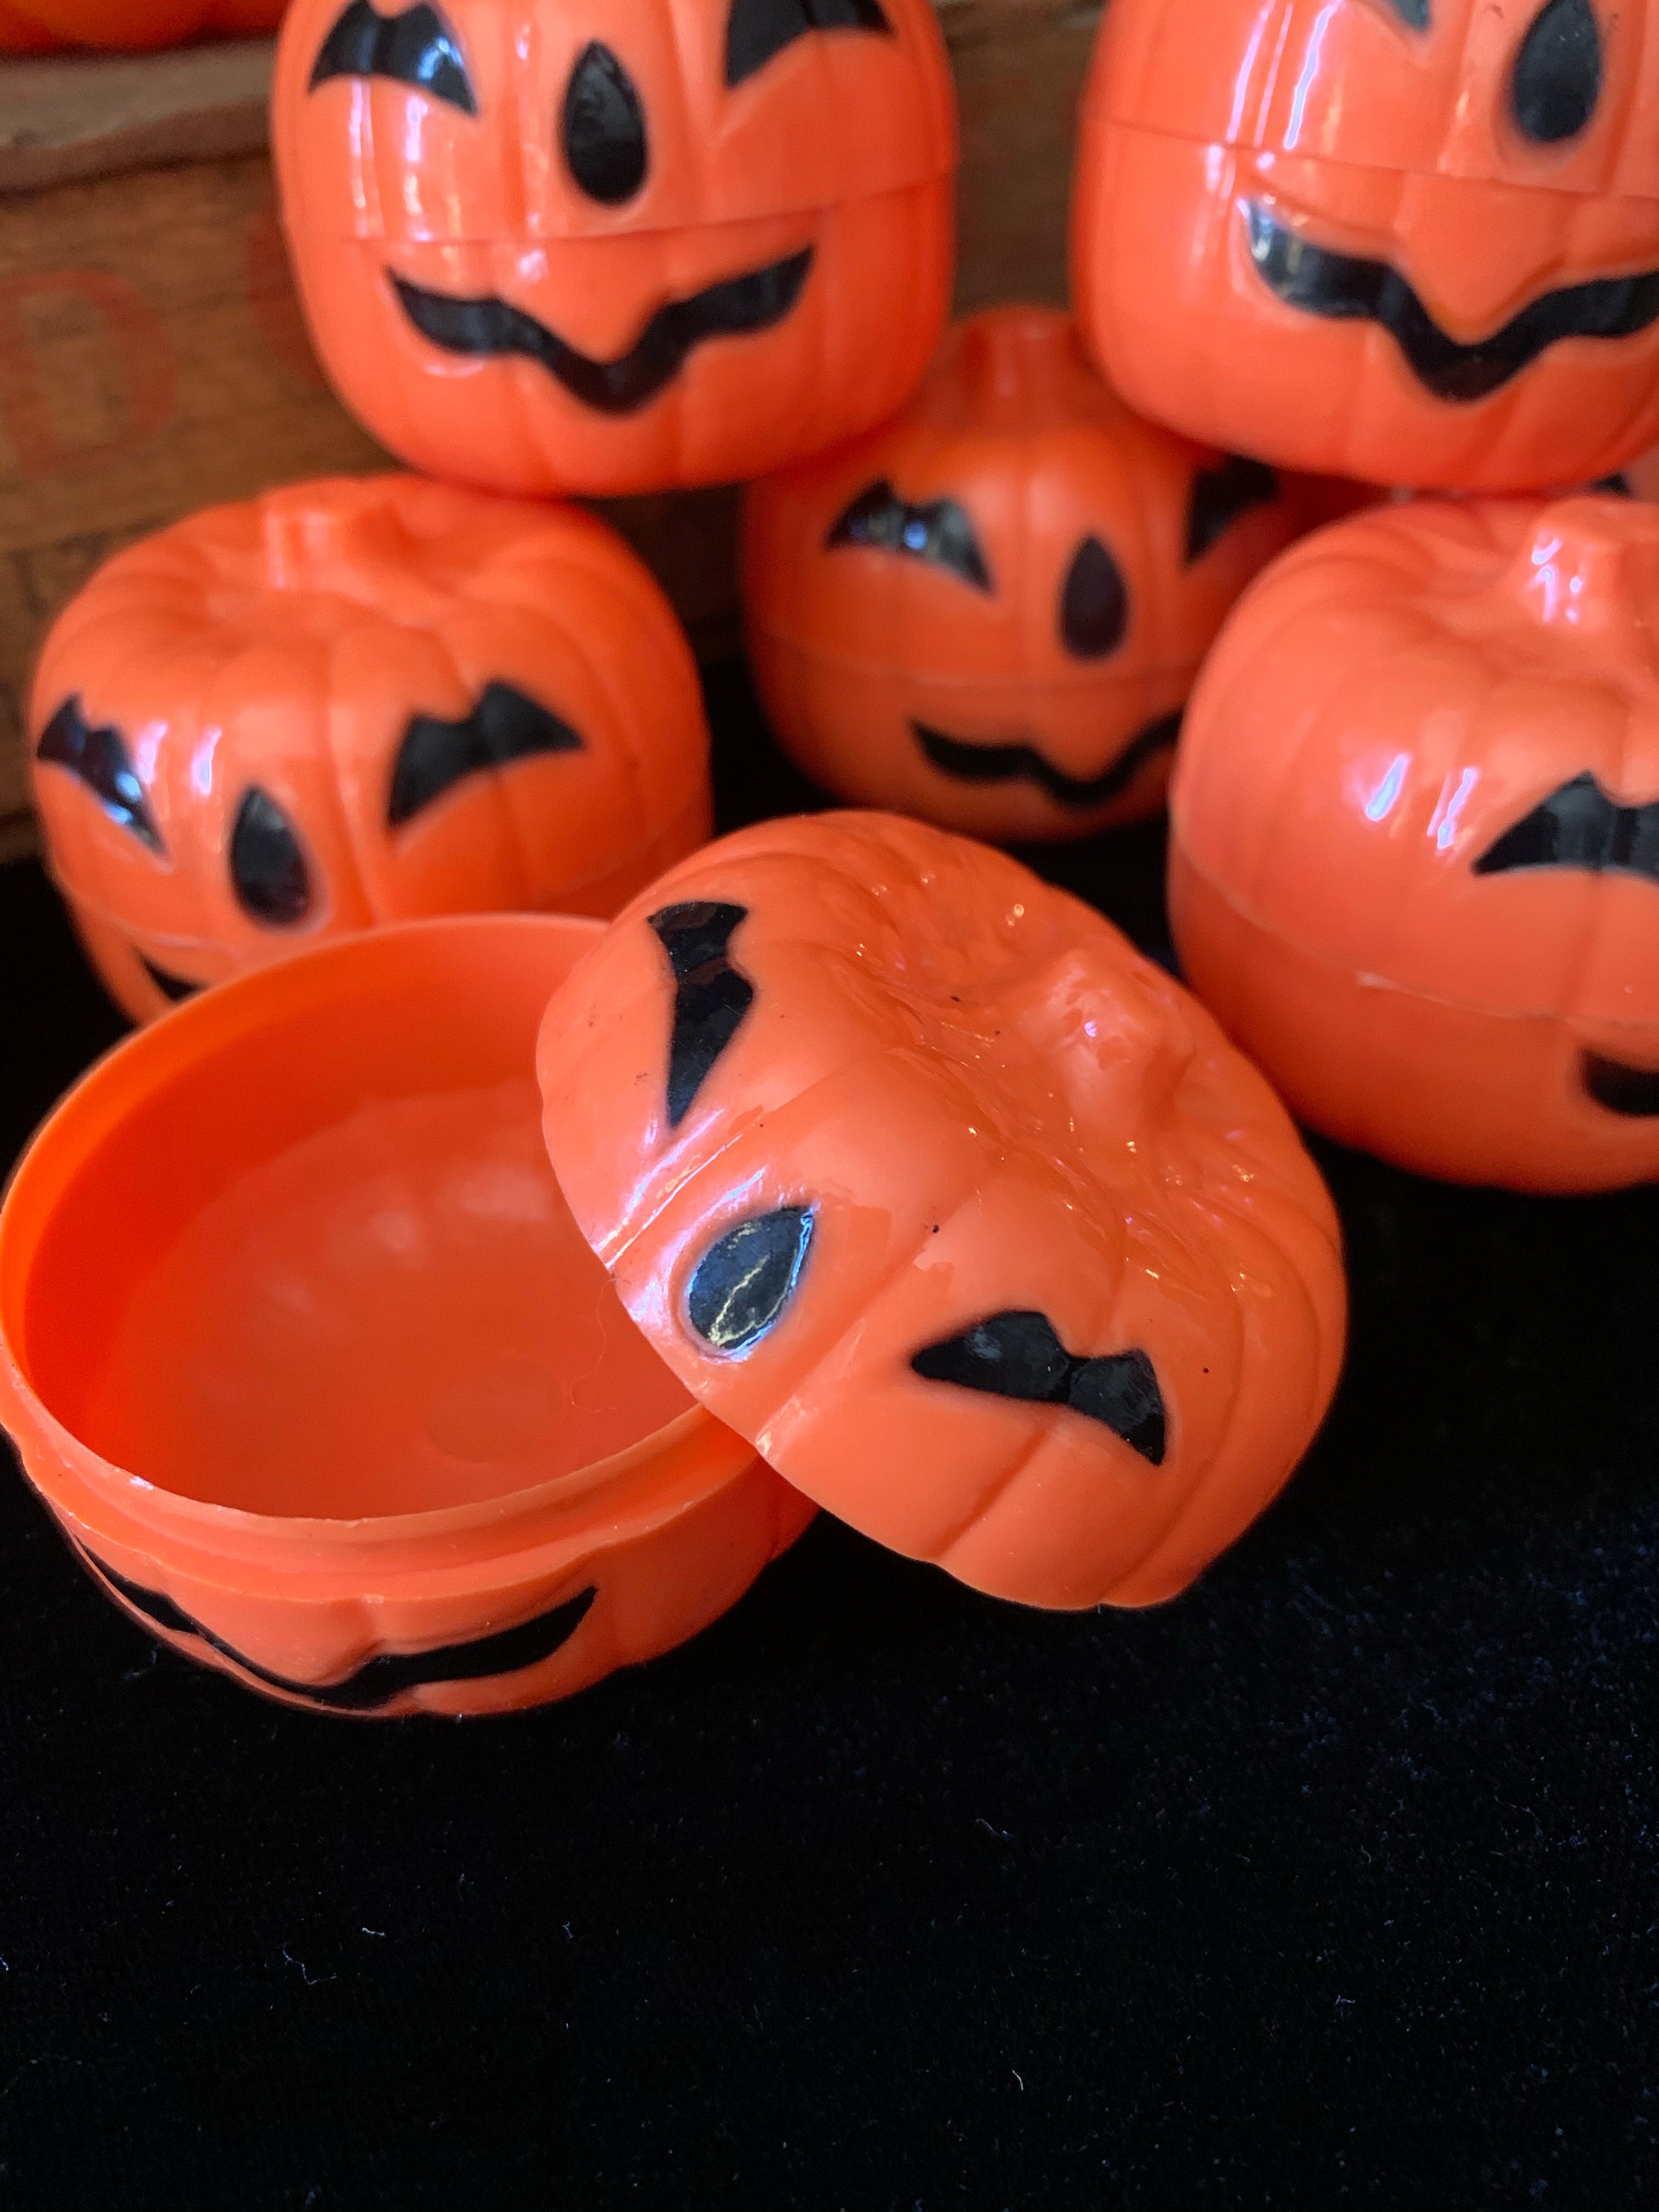 11 Vintage 1995 Jack O’Lantern Candy Containers